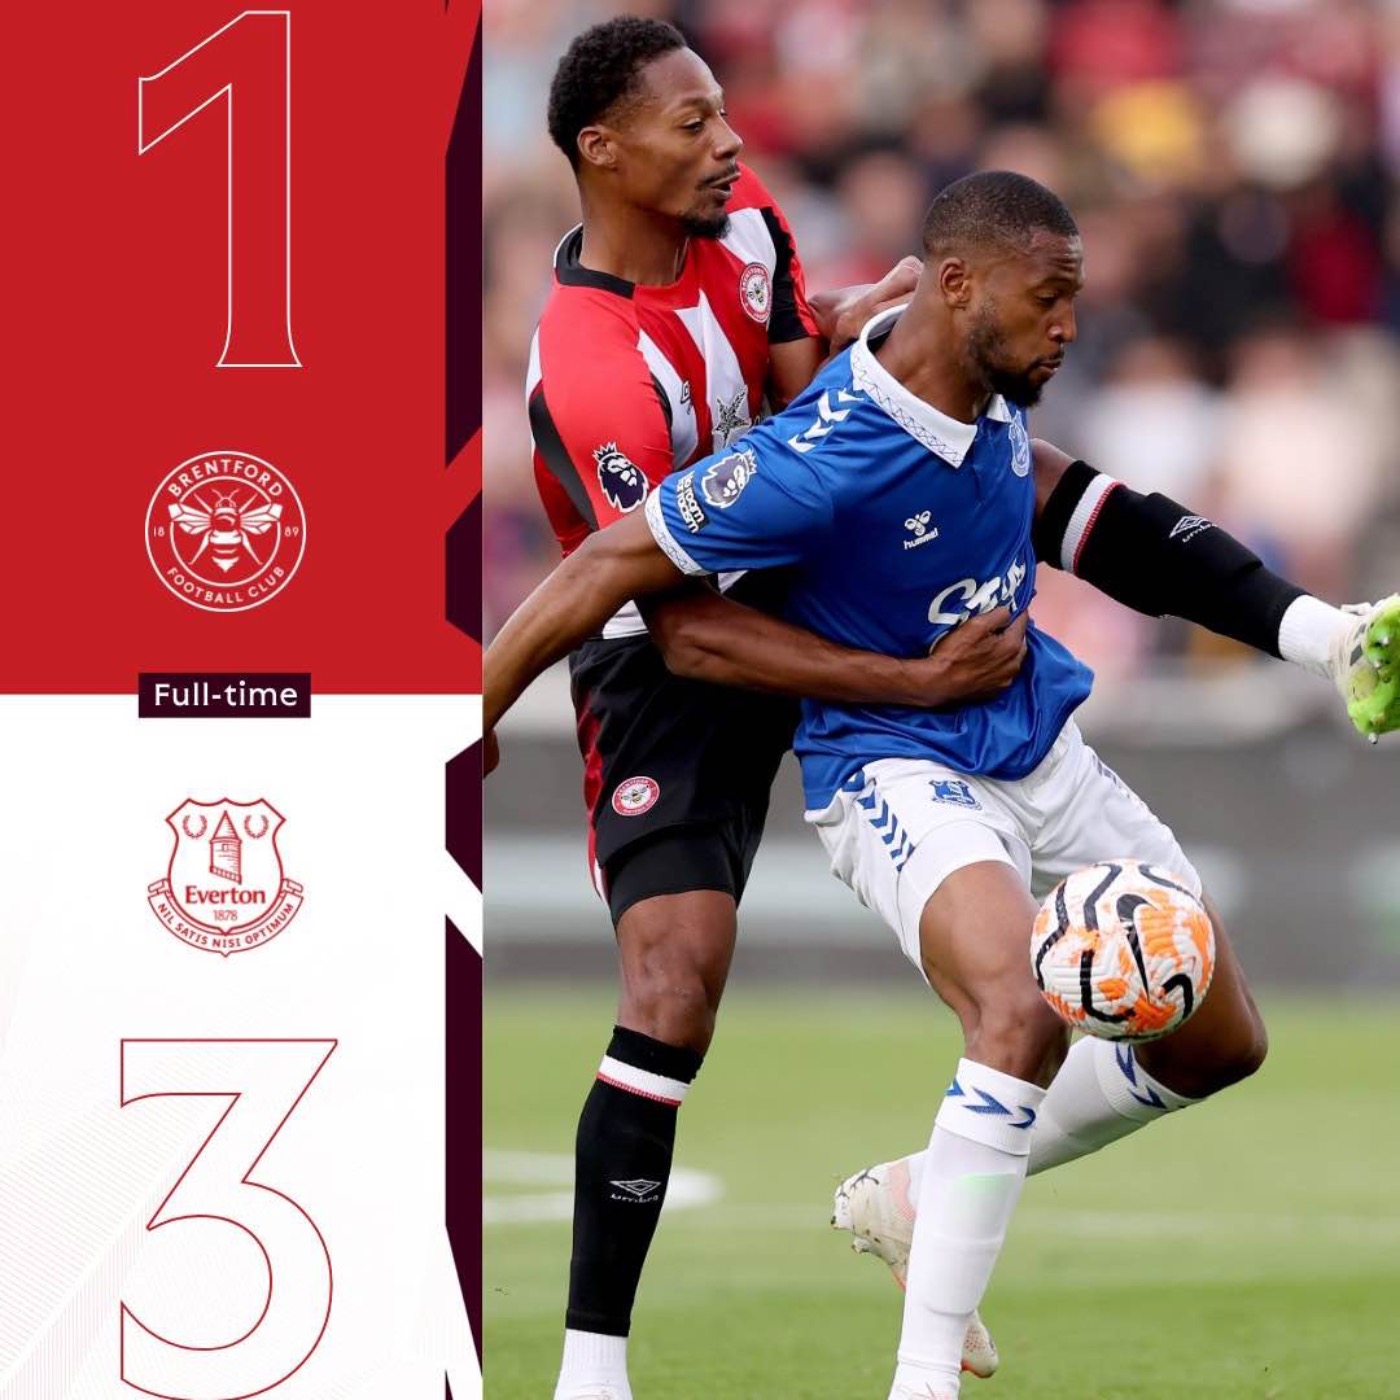 Brentford 1 Everton 3 - post-match podcast from the stands